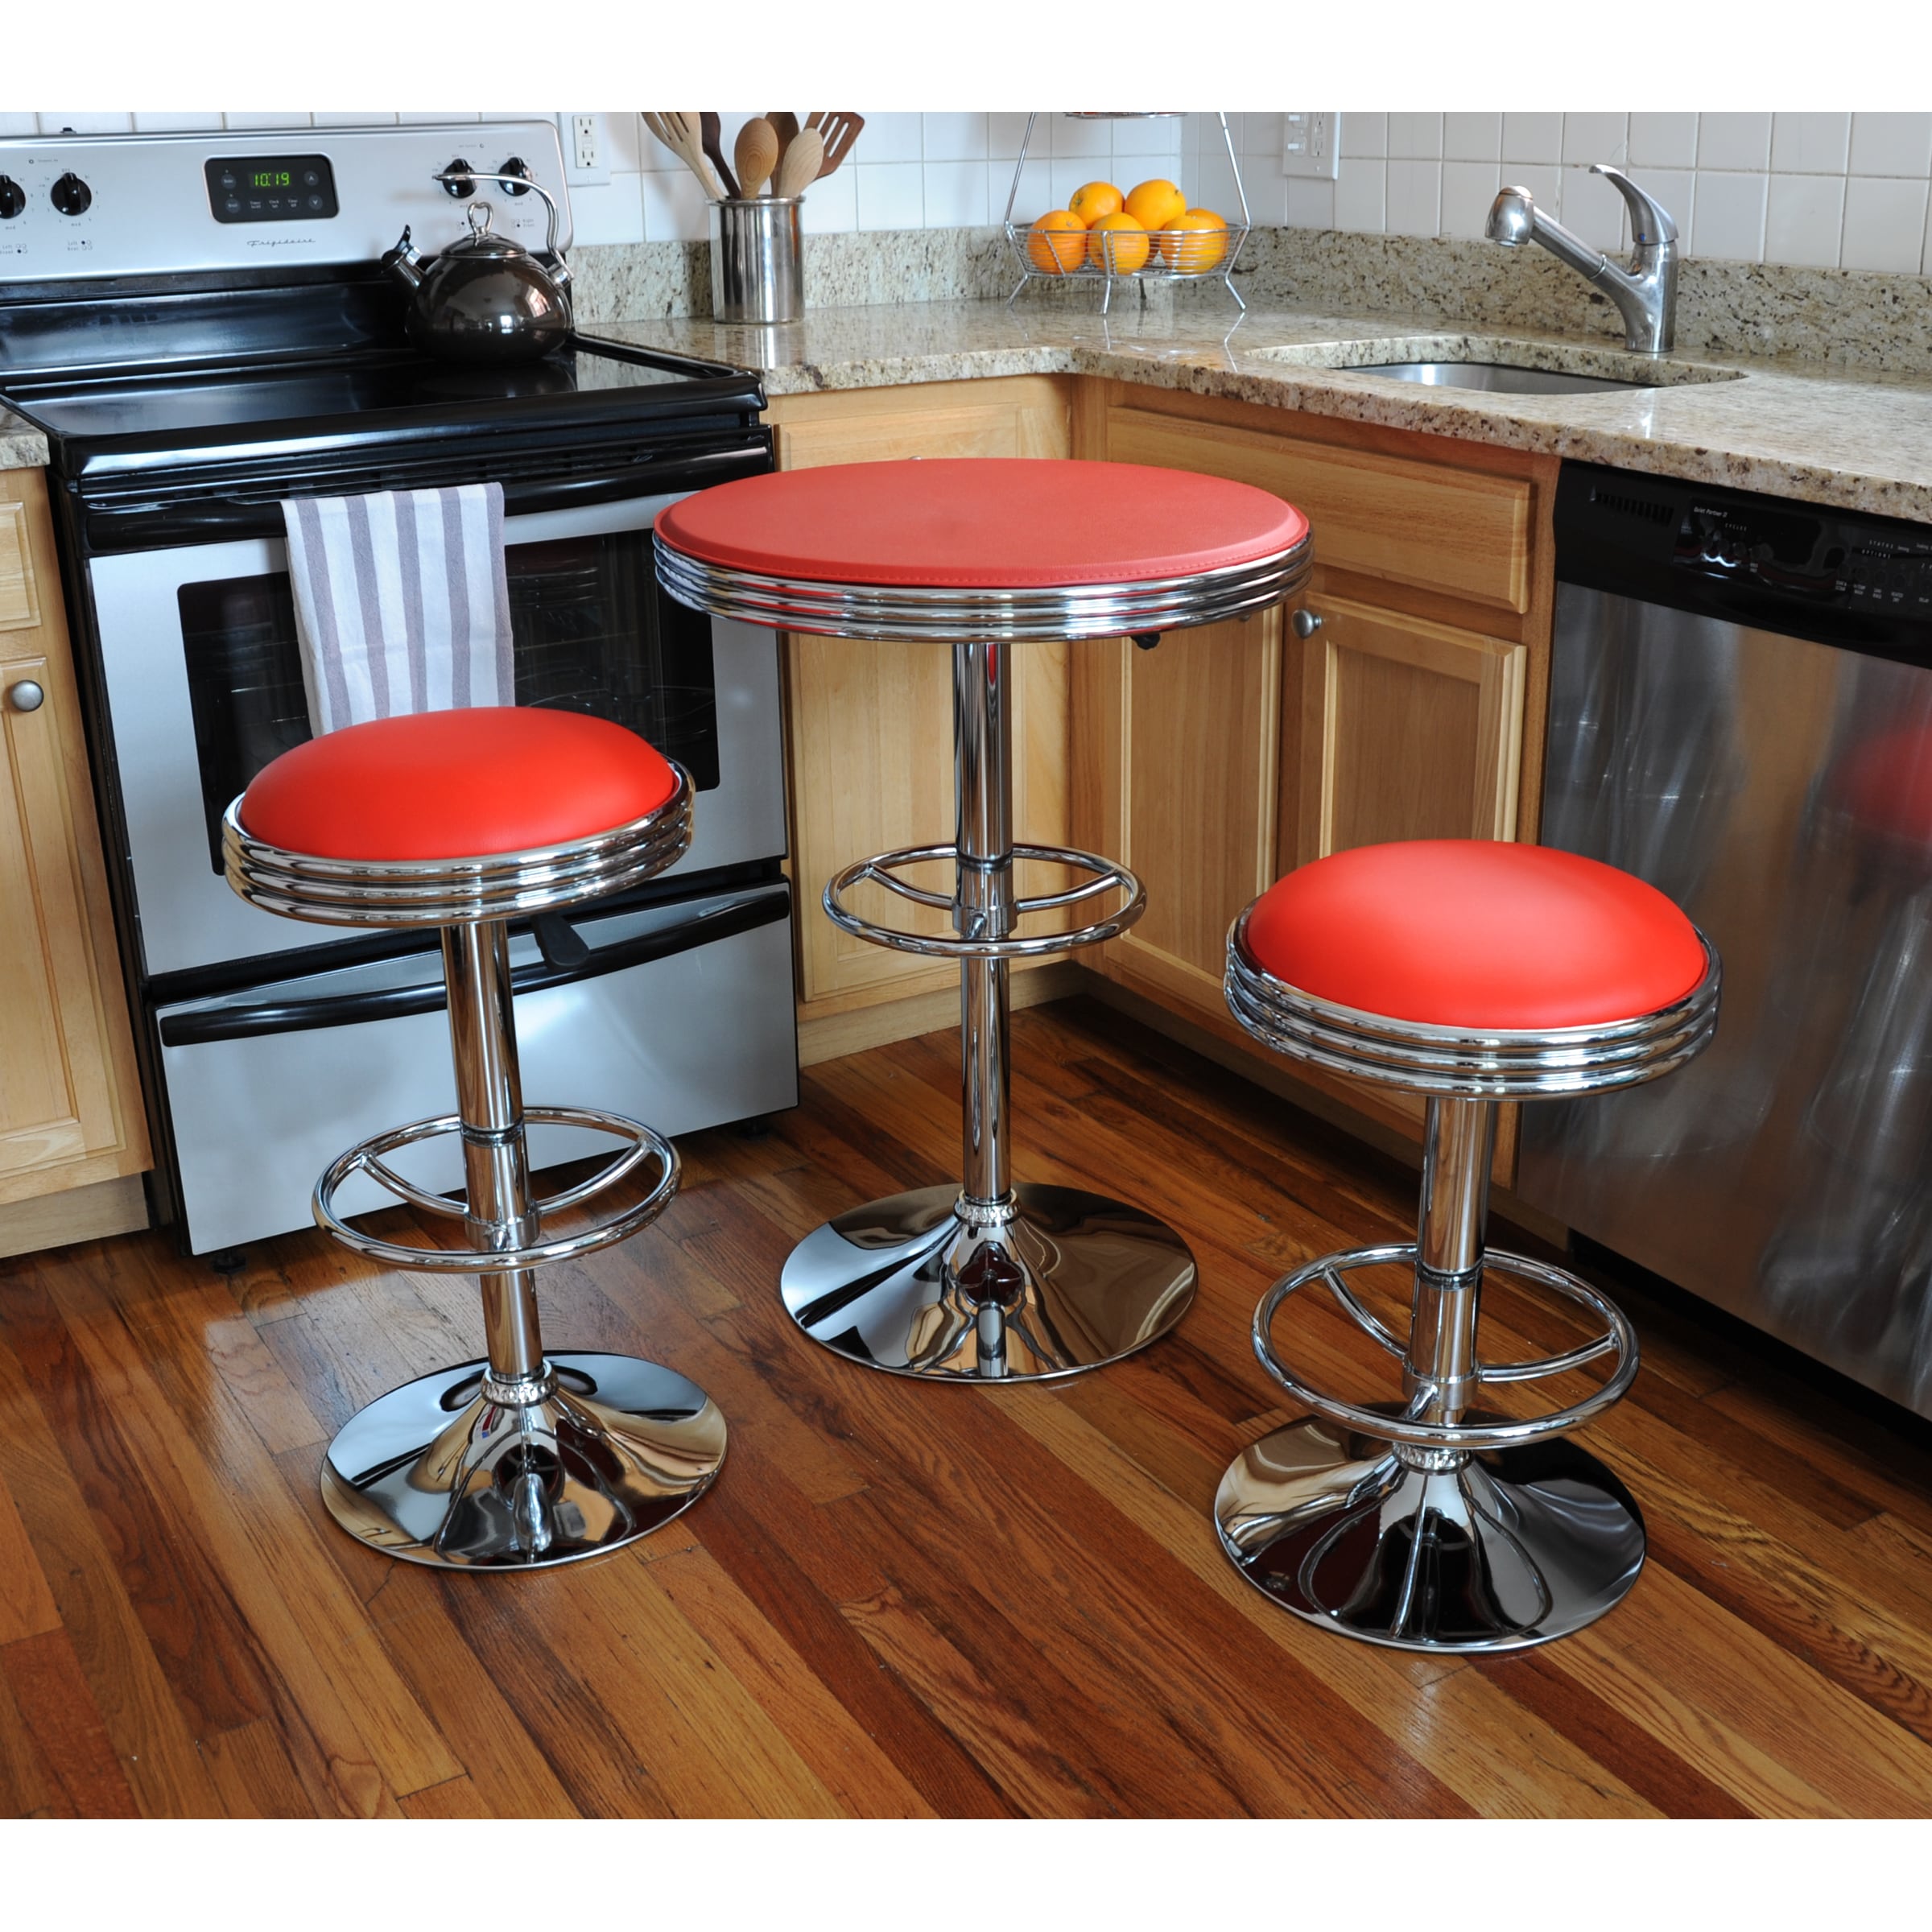 Restored Vintage Red Gray Apples Formica Dinette Table W Chairs